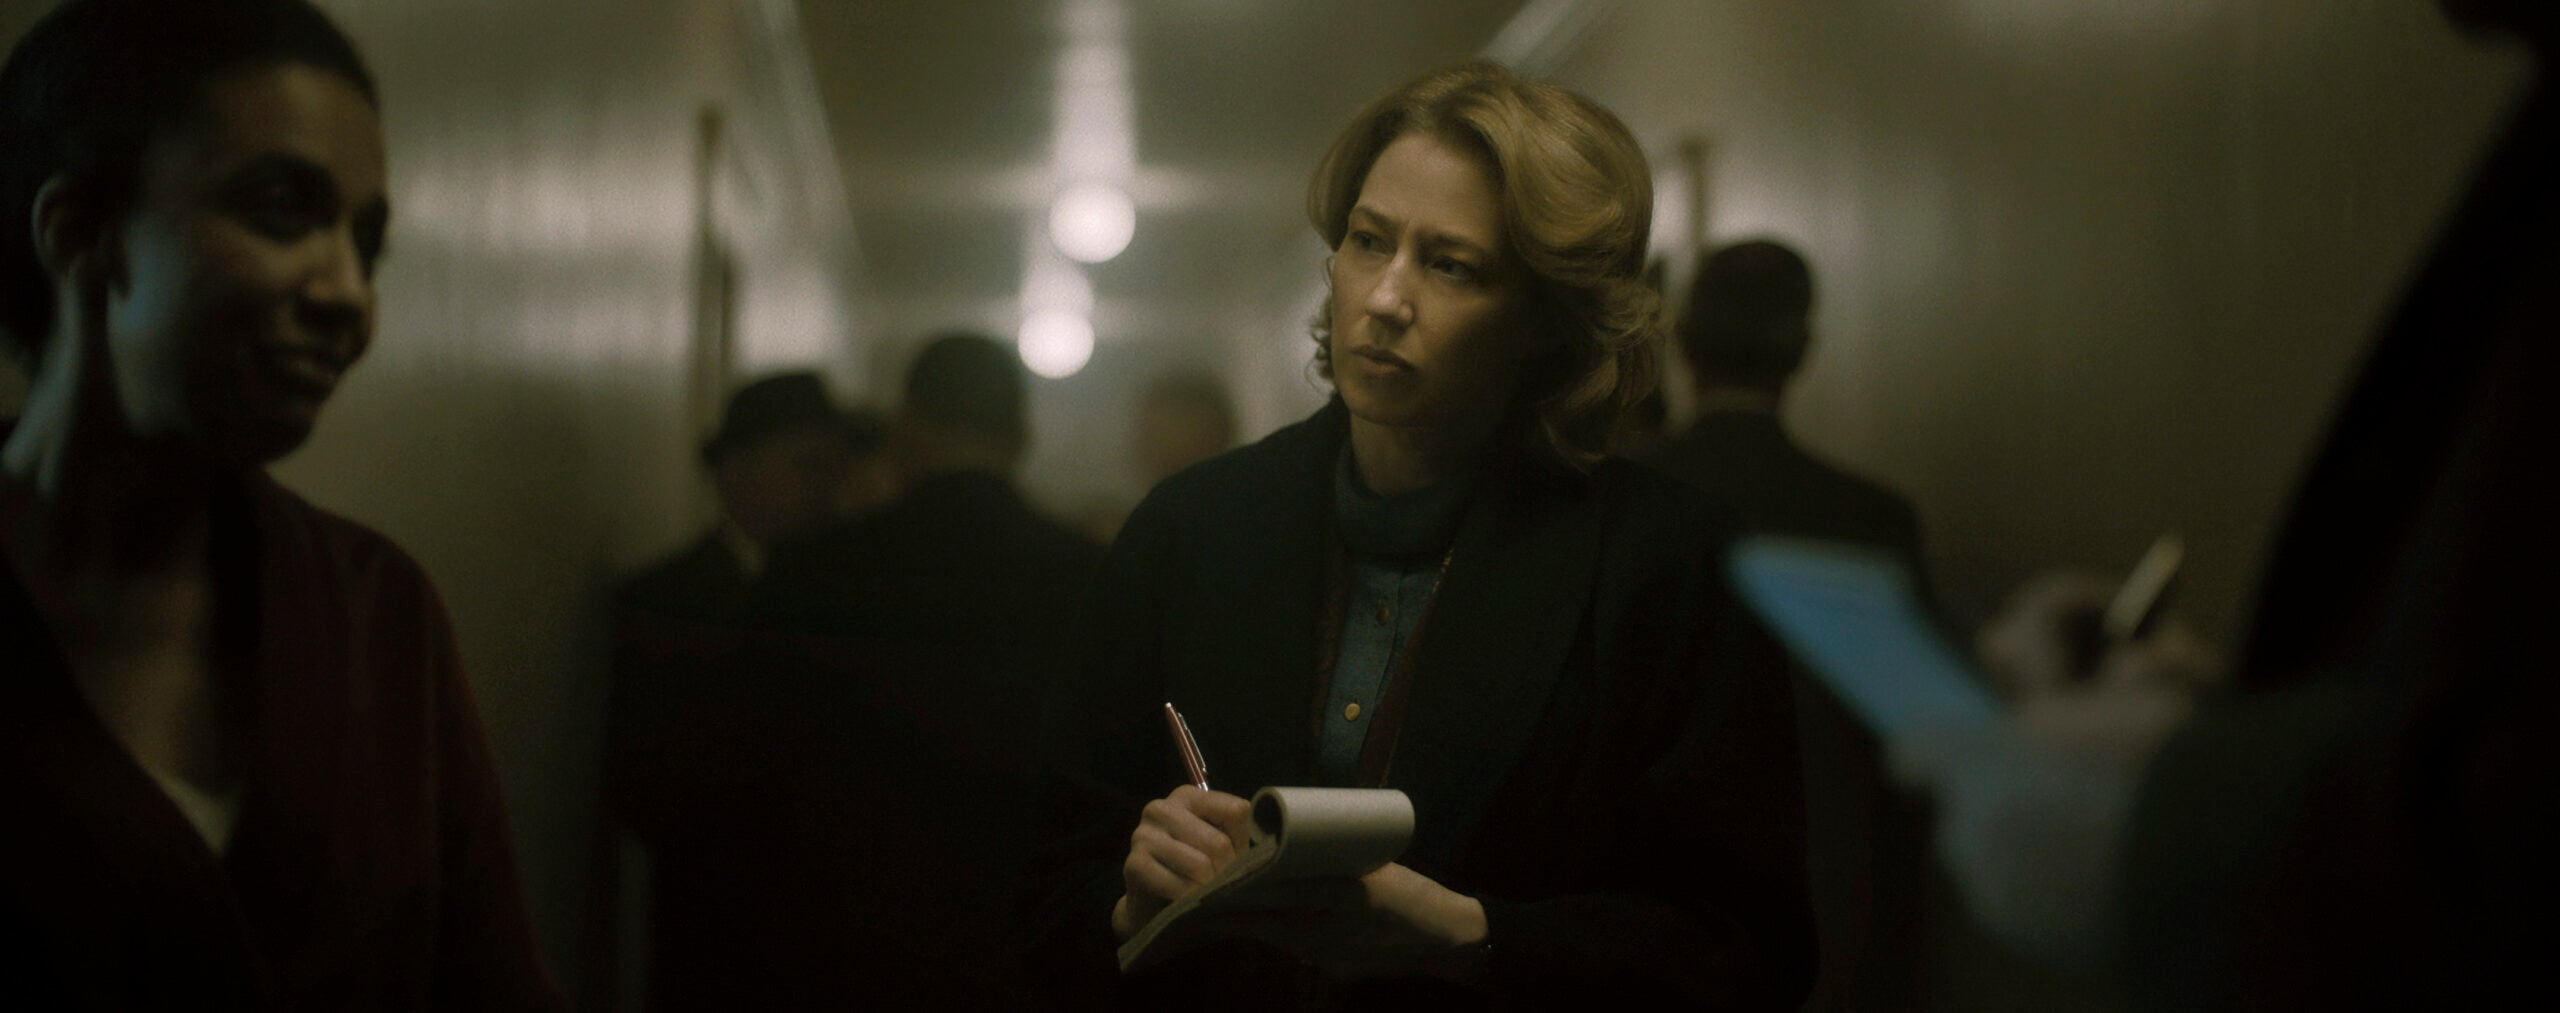 Carrie Coon as Jean Cole in "Boston Strangler"